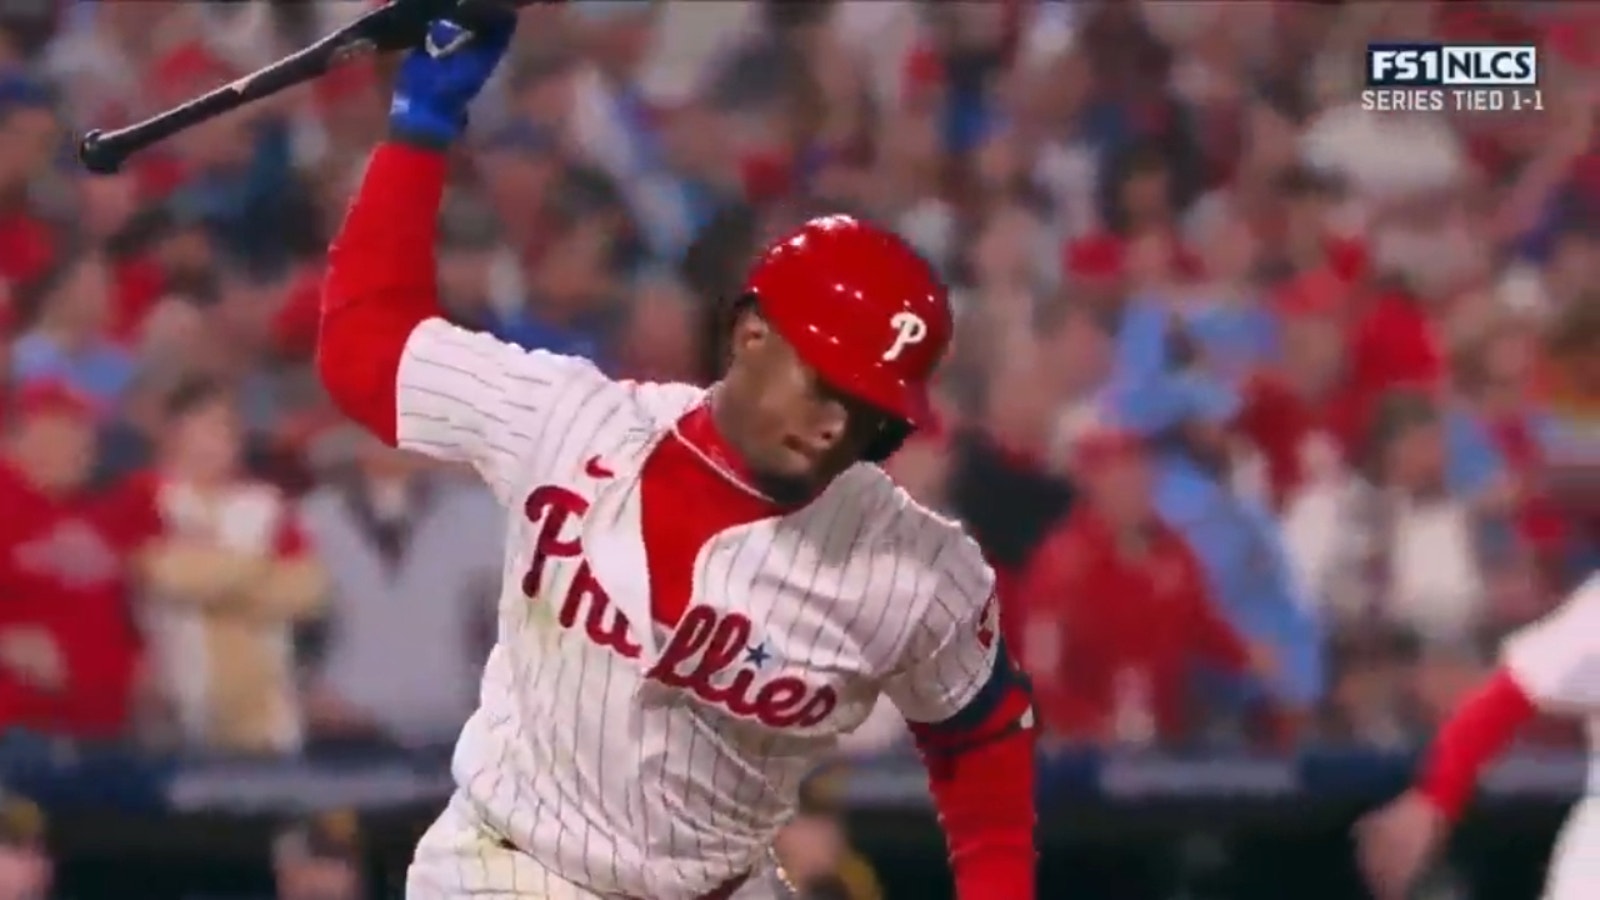 Jean Segura drives in two with a single as Phillies take 3-1 lead